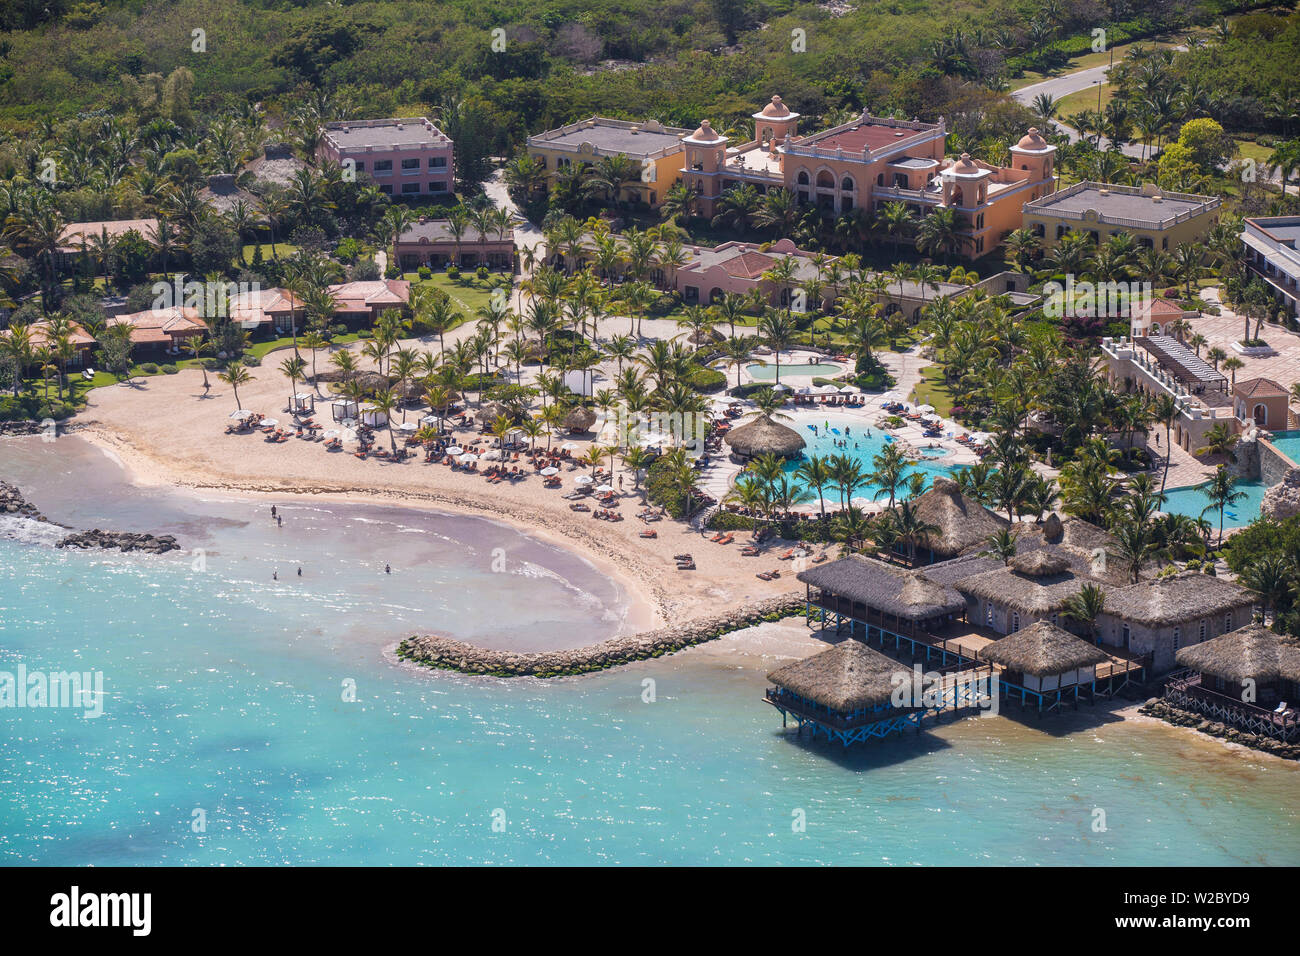 Dominican Republic, Punta Cana, Cap Cana, View of The Sanctuary Cap Cana Resort and Spa, Stock Photo